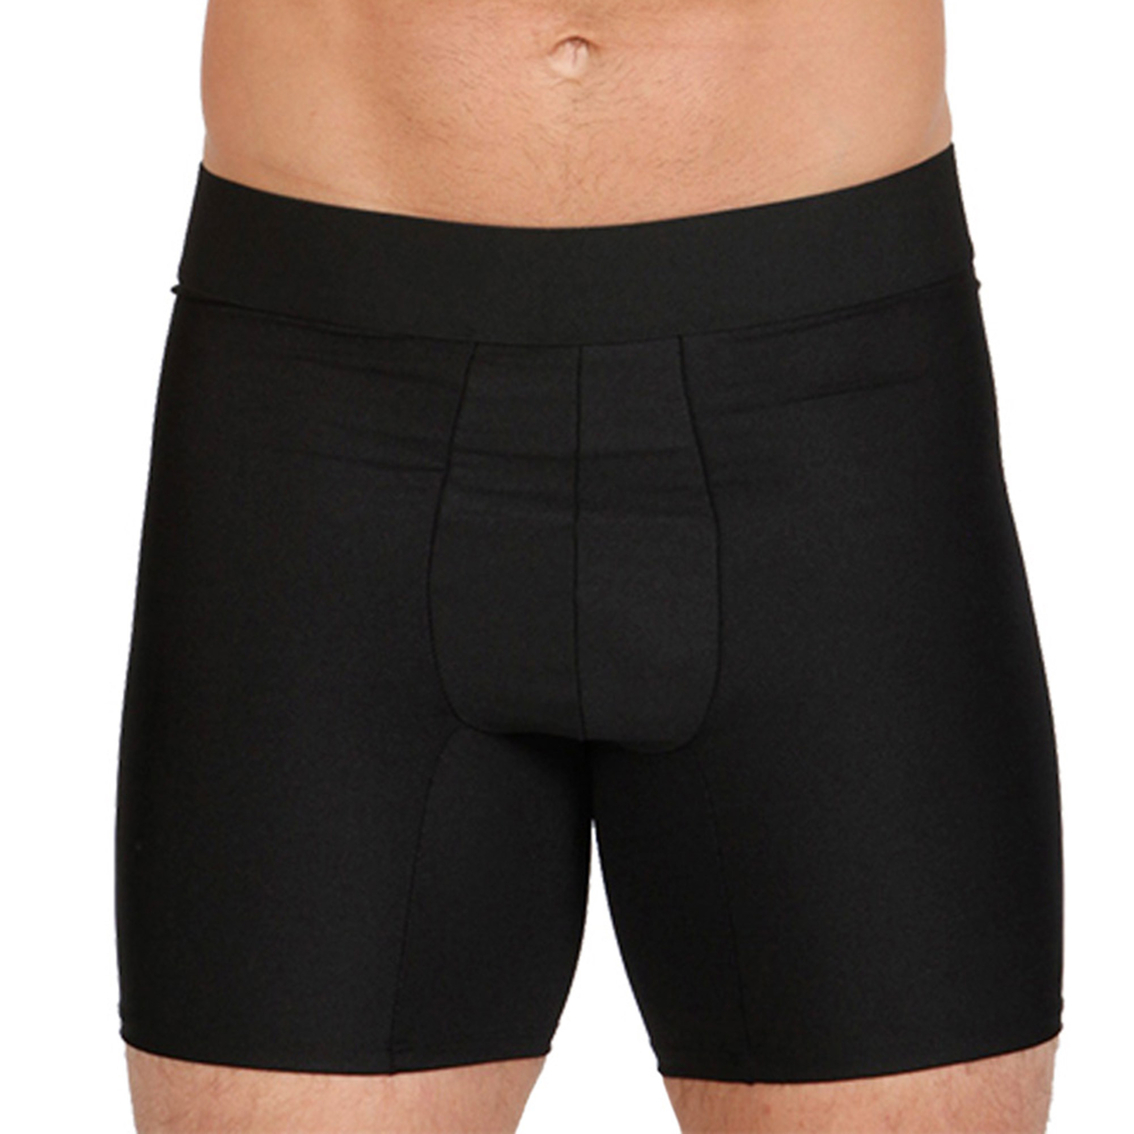 Insta Slim Compression Shorts With Removeable Butt Pads | Underwear ...